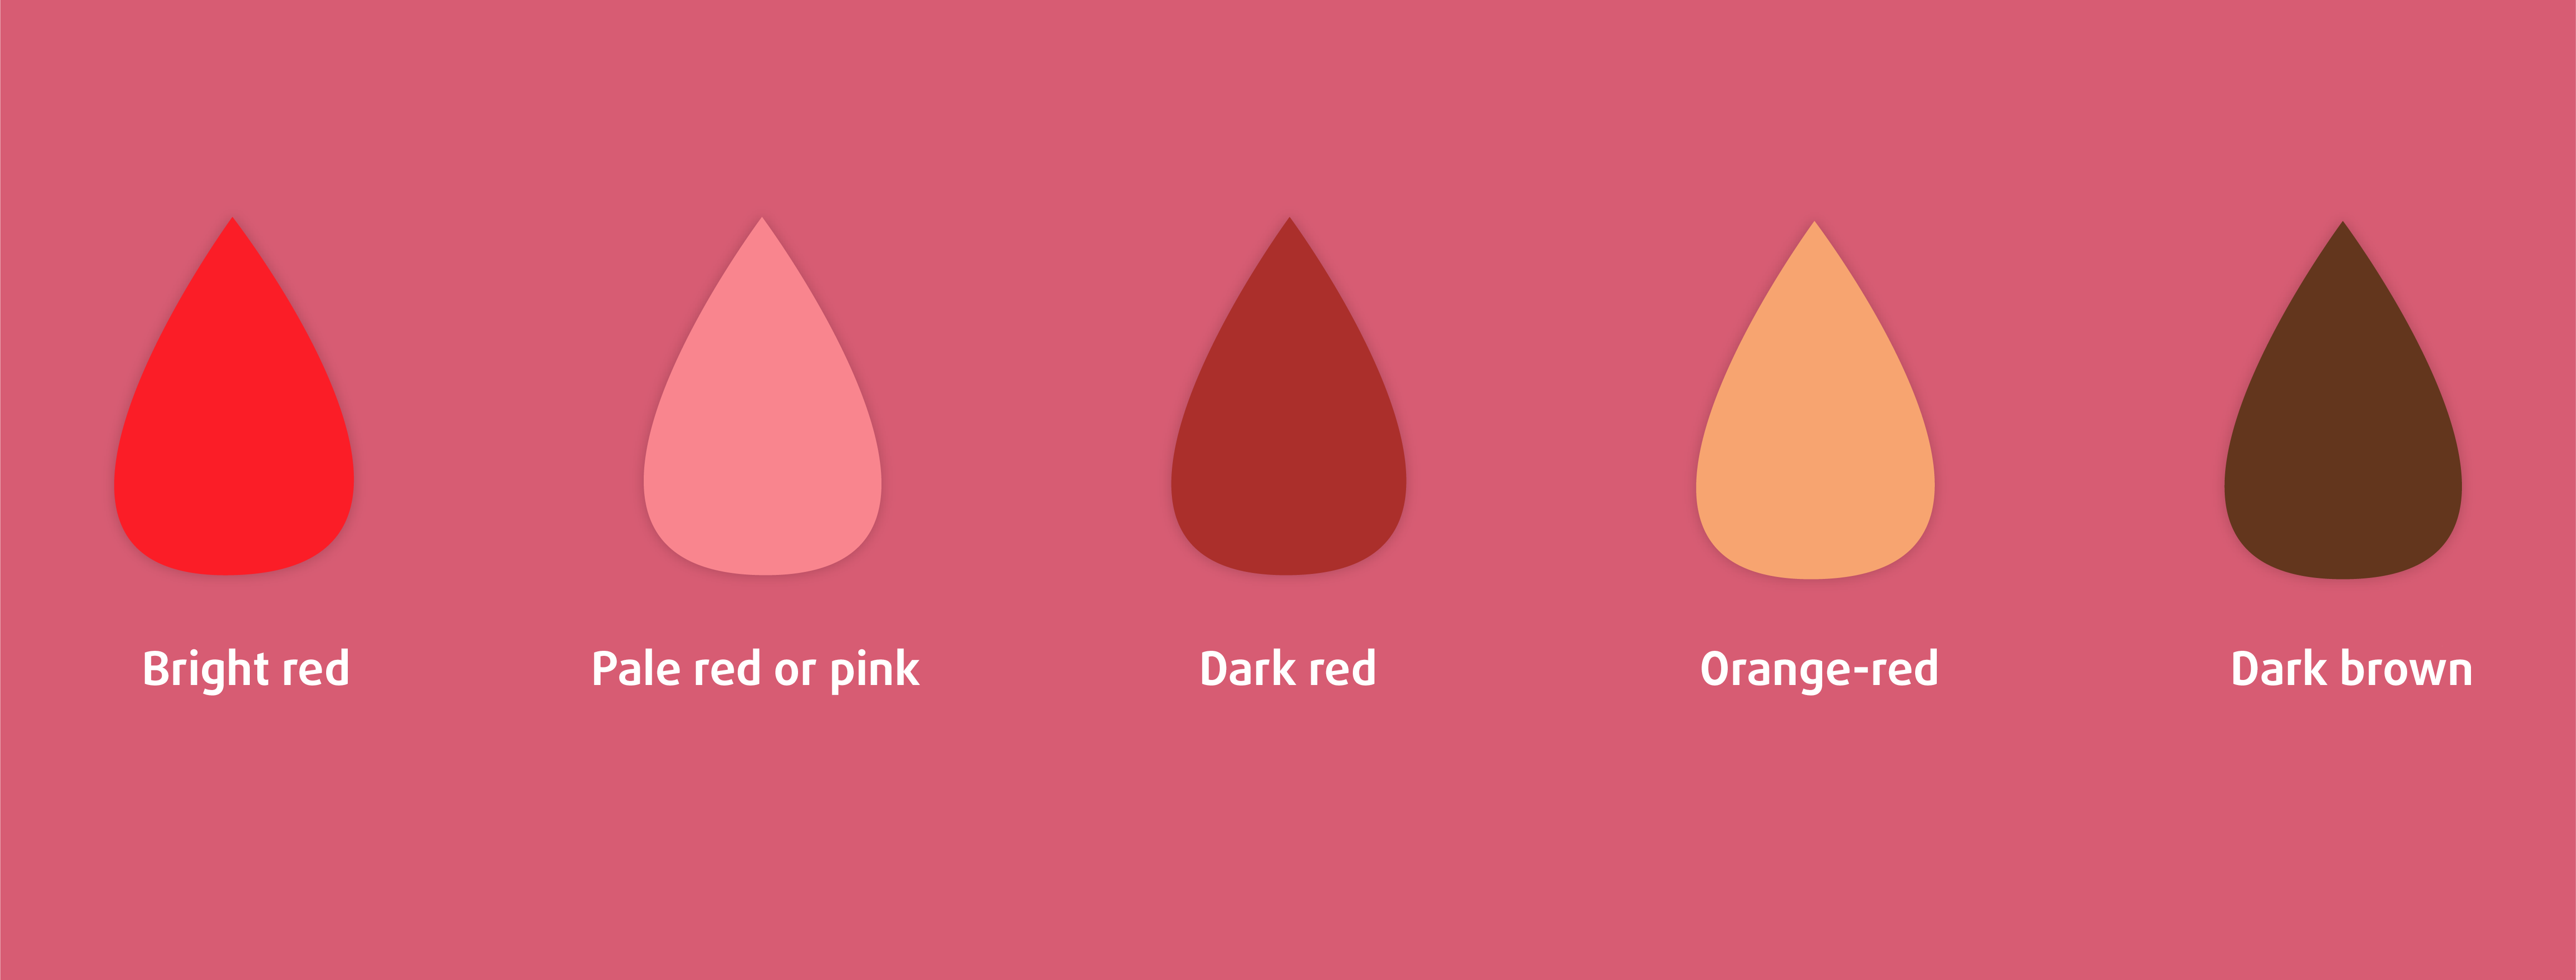 Should Blood Be Dark Or Bright Red